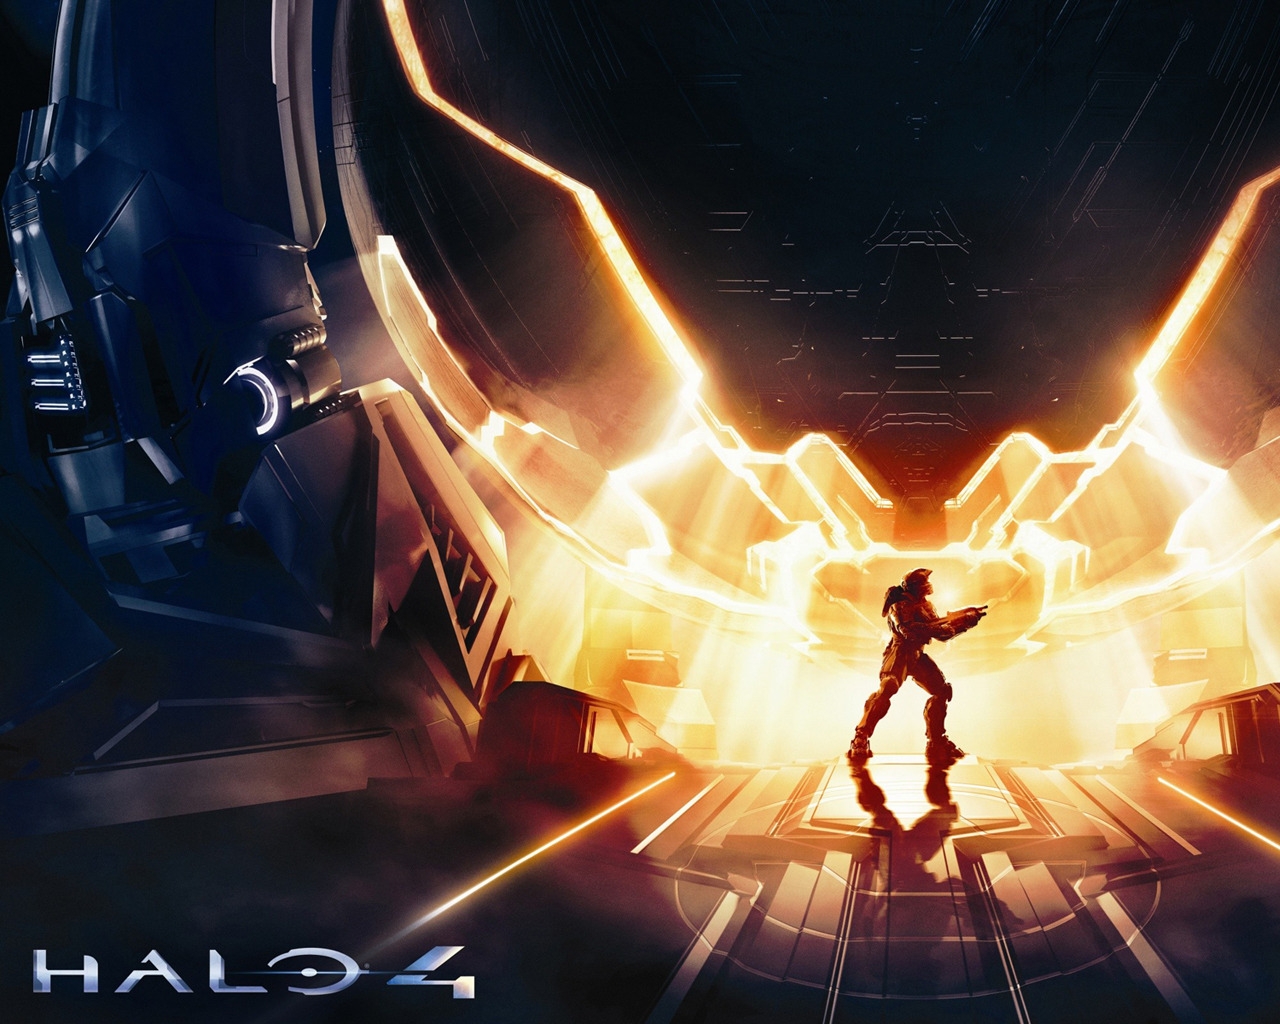 Halo 4 Character for 1280 x 1024 resolution